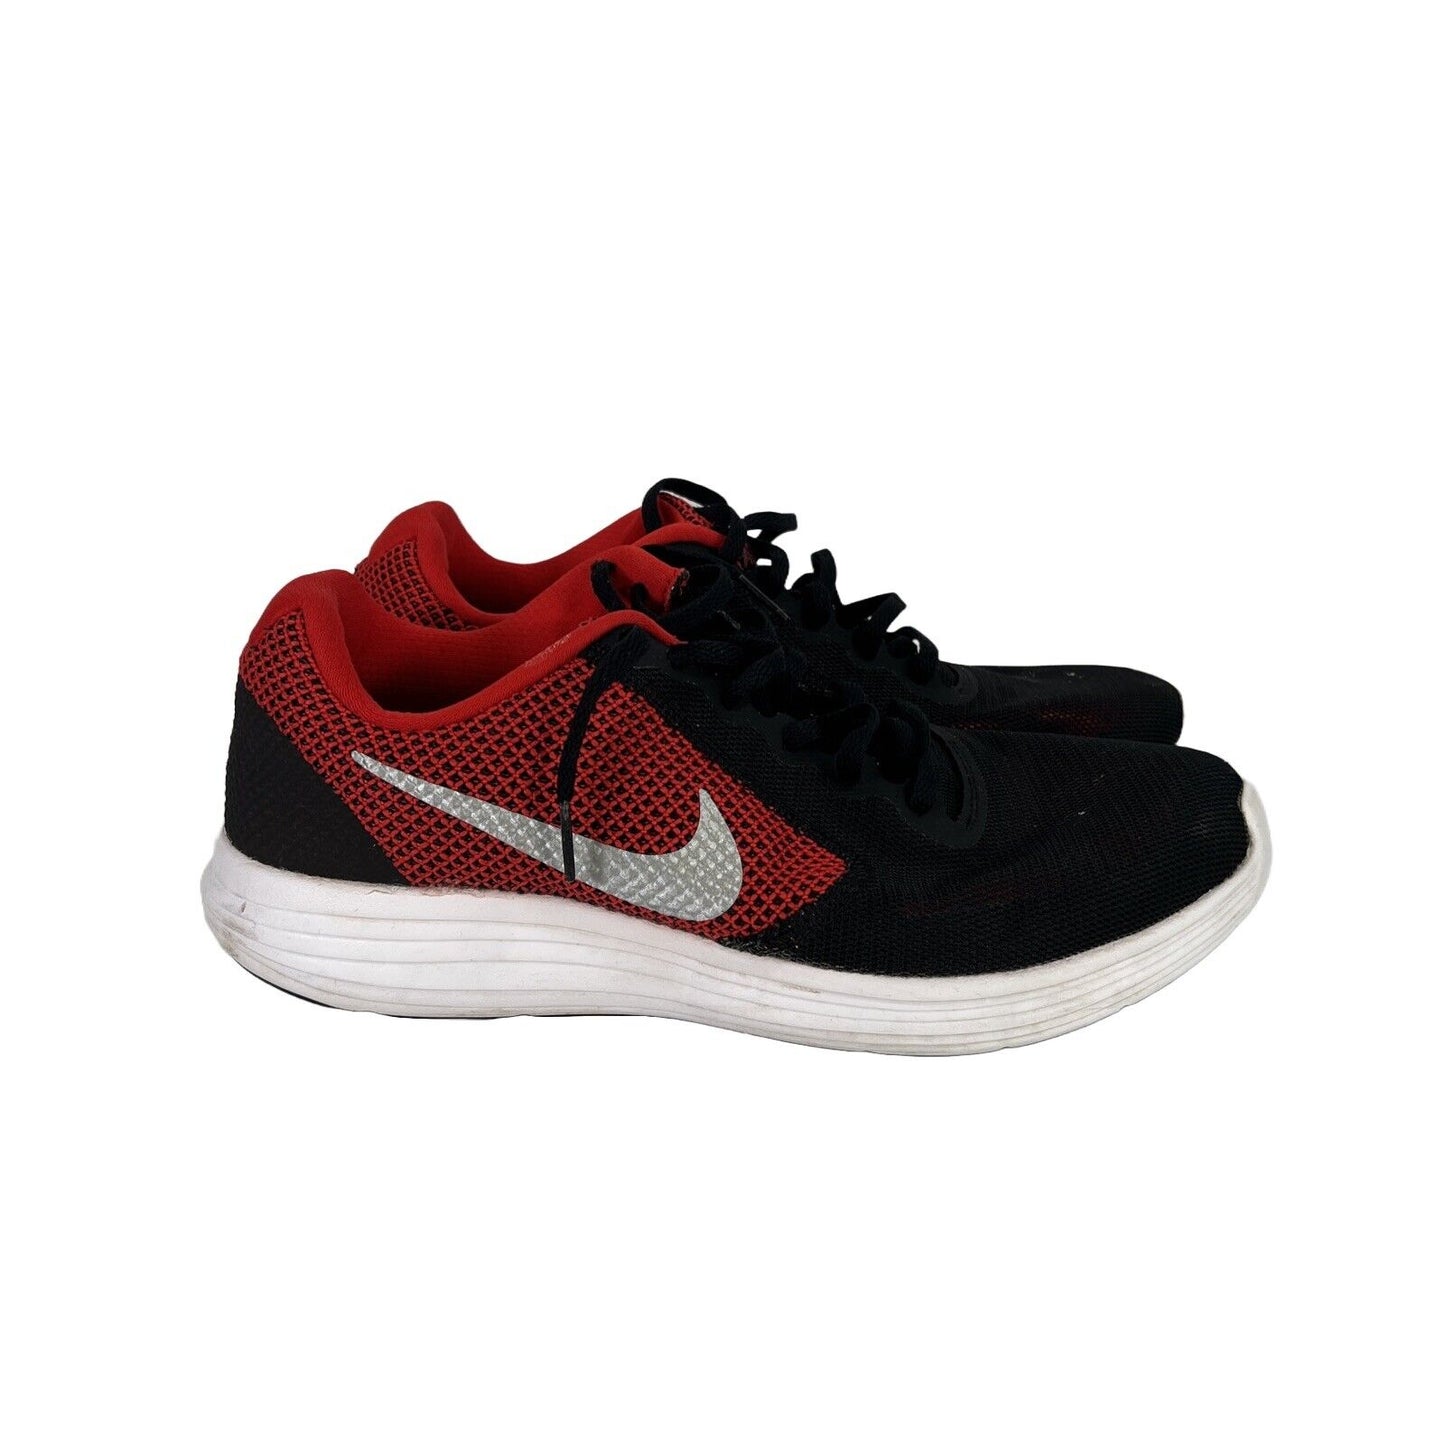 Nike Mens Black/Red Revolution 3 Revolution Lace Up Athletic Shoes - 10.5